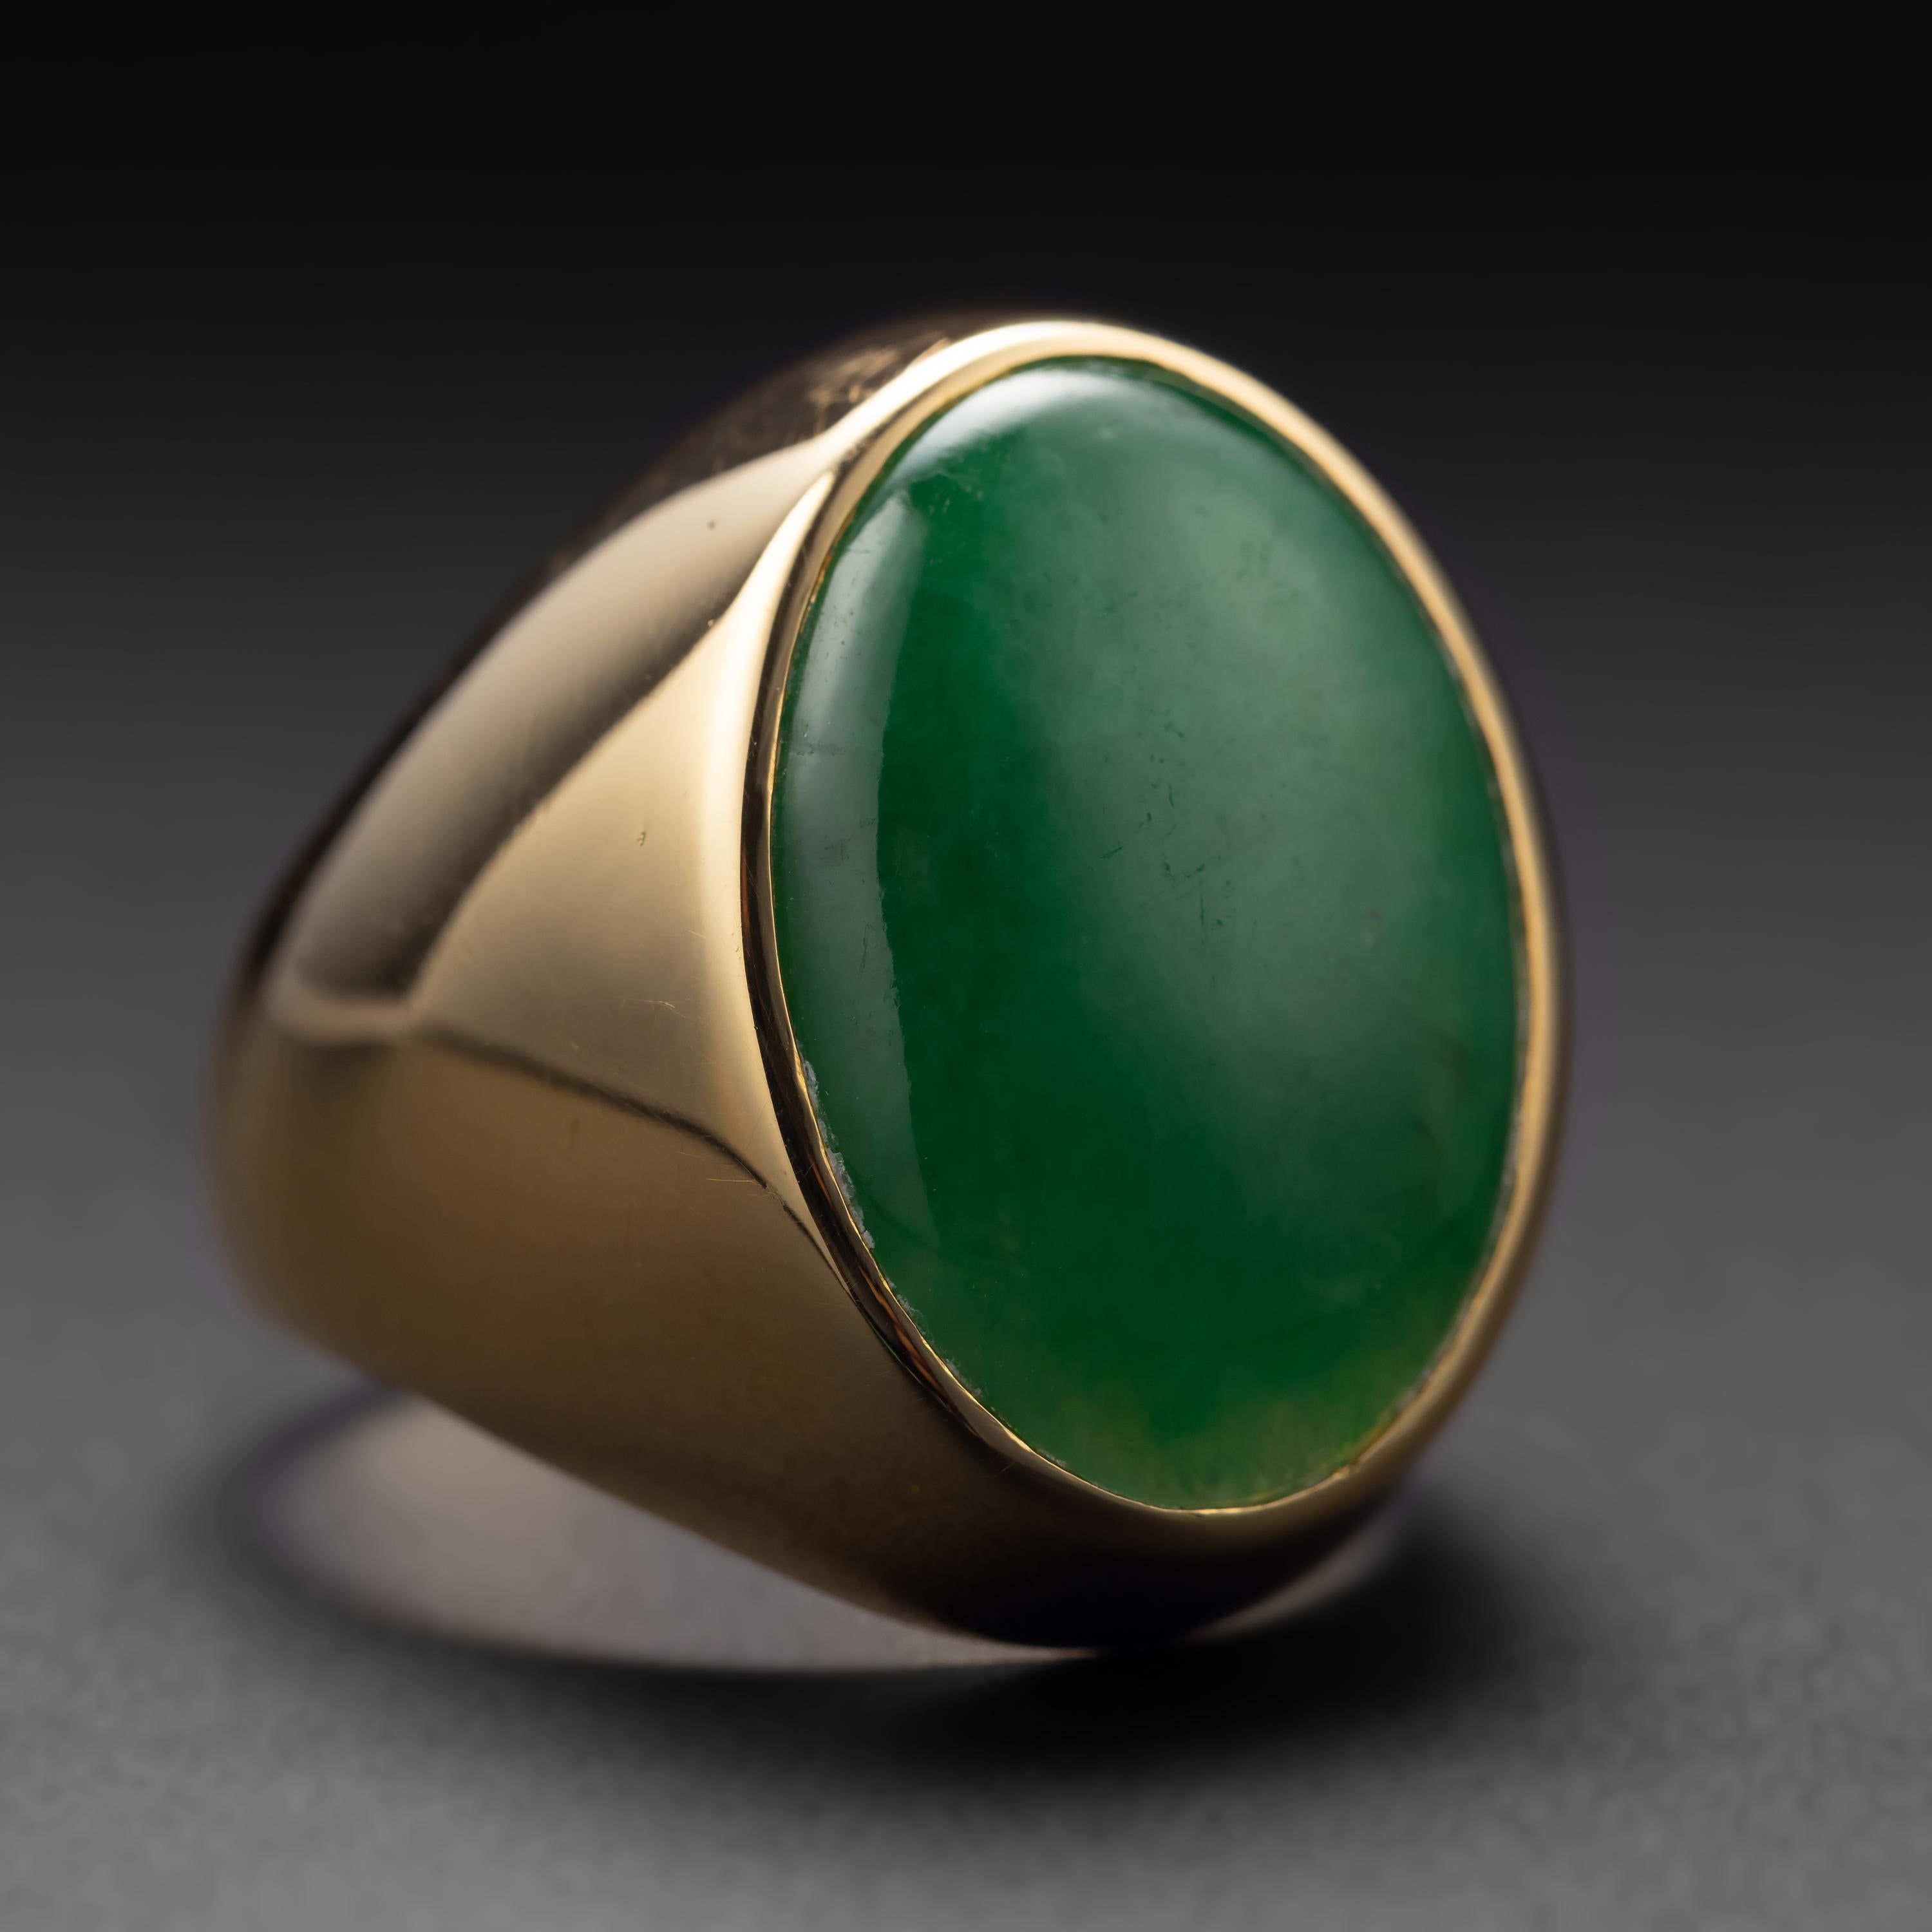 Rare and impressive: this substantial and beautiful jade ring from the 1950s was crafted by hand from rich 18K yellow gold and features large cabochon of natural and untreated Burmese jadeite jade. The jade stone measures a sizeable 13.90 x 19.90mm